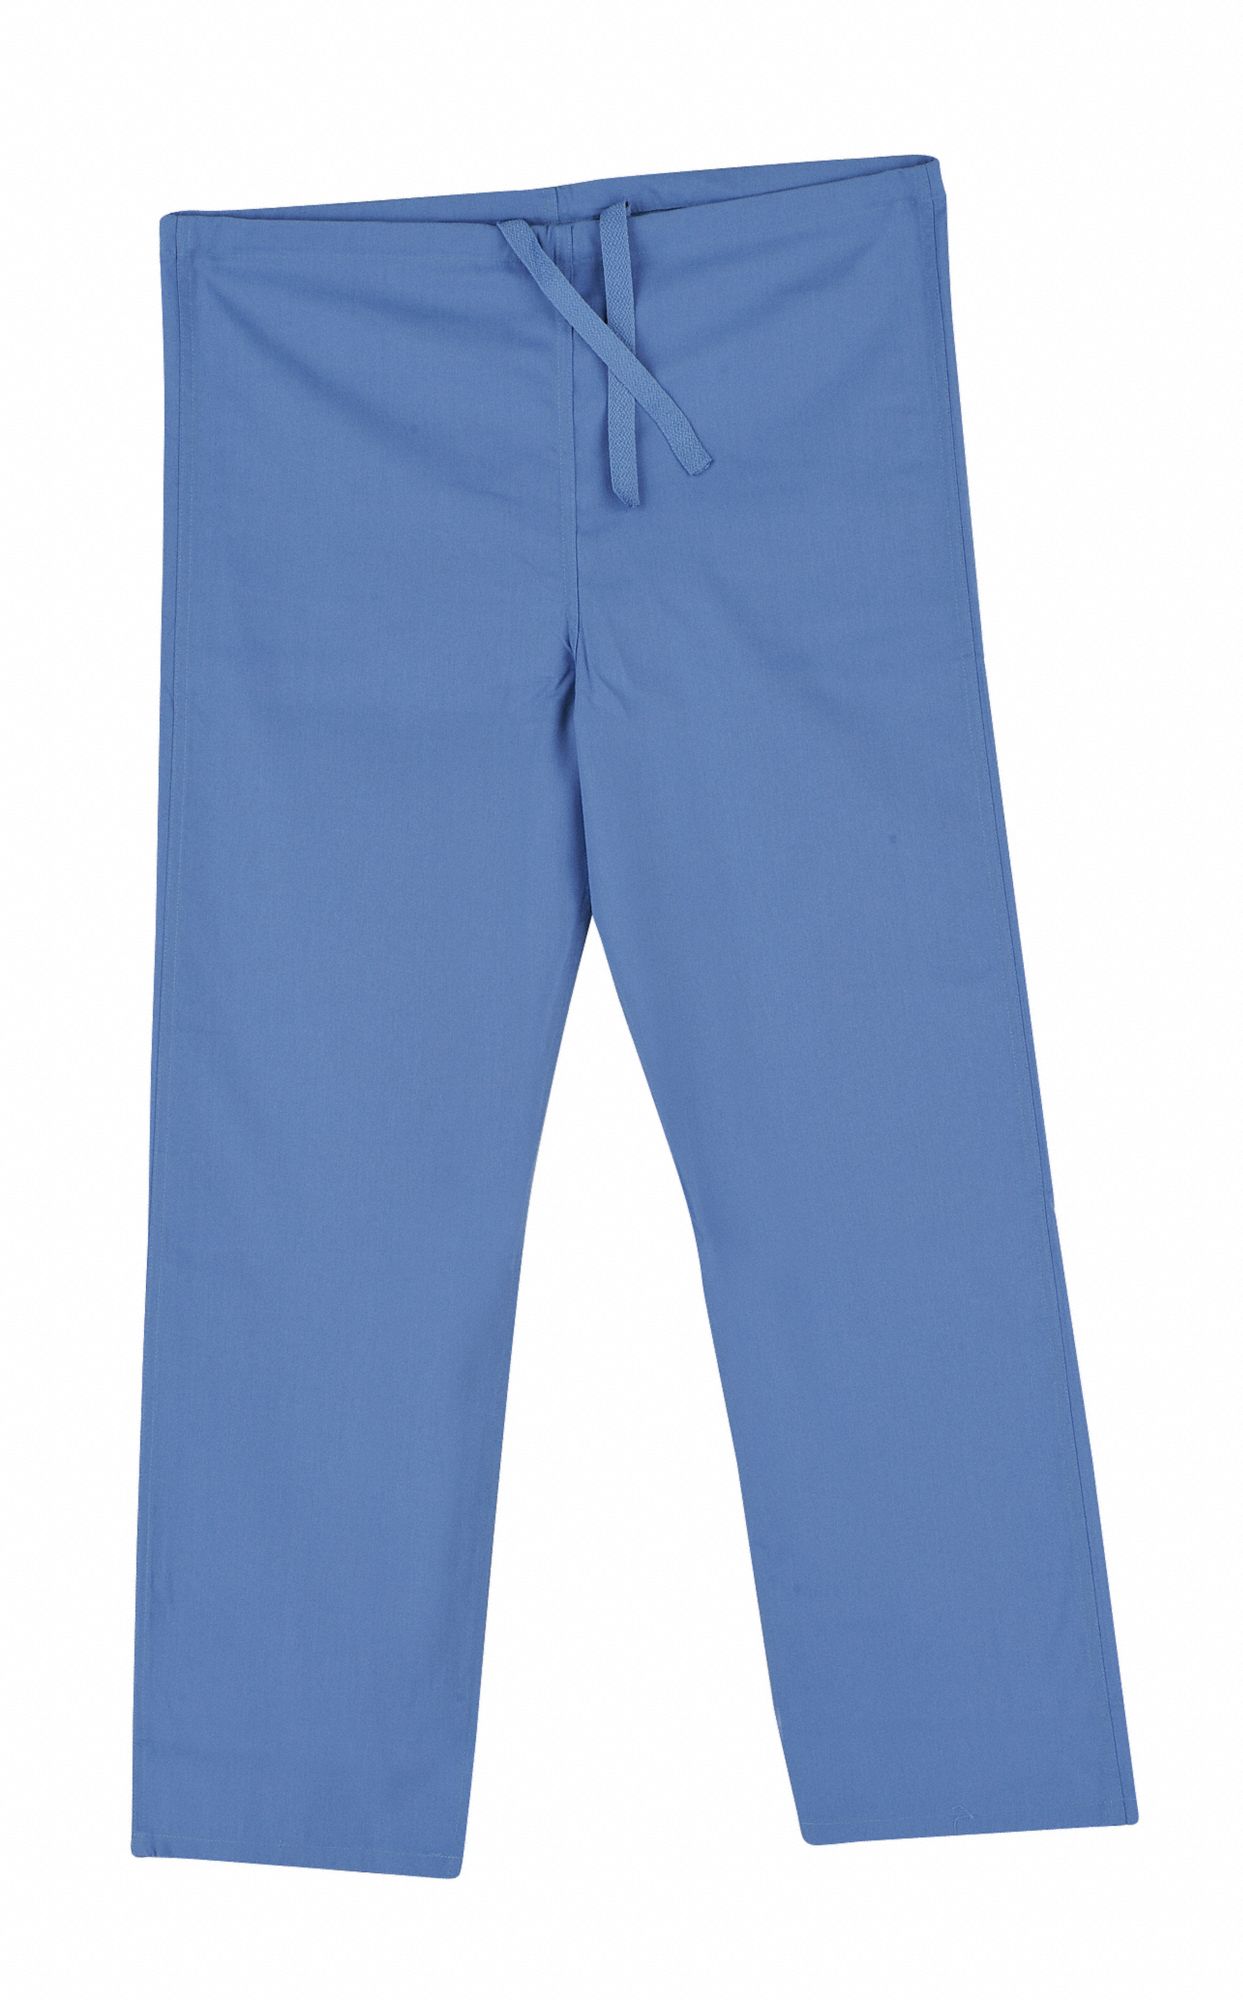 Scrub Pants: Navy, Unisex, 27 in x 31 1/2 in, XS, Cotton/Polyester, Pants, 1 Pockets